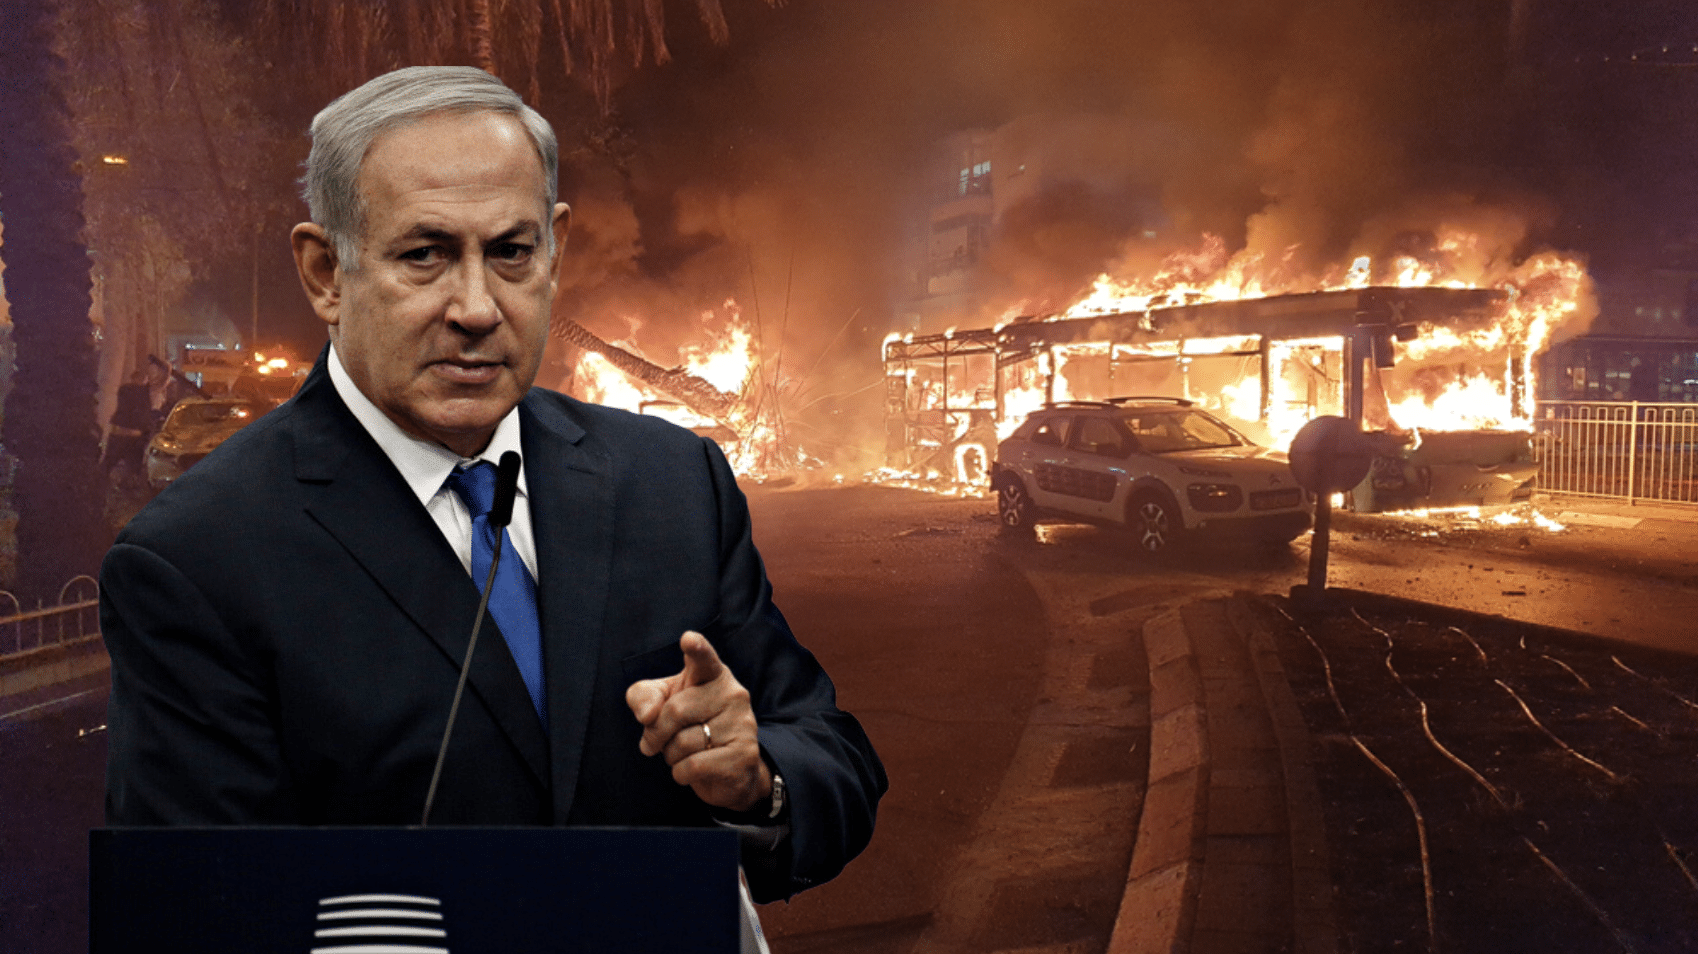 WORLD IN SHOCK: 600 dead, 2,000 injured, 100 kidnapped, Netanyahu vows revenge, Could spiral out of control